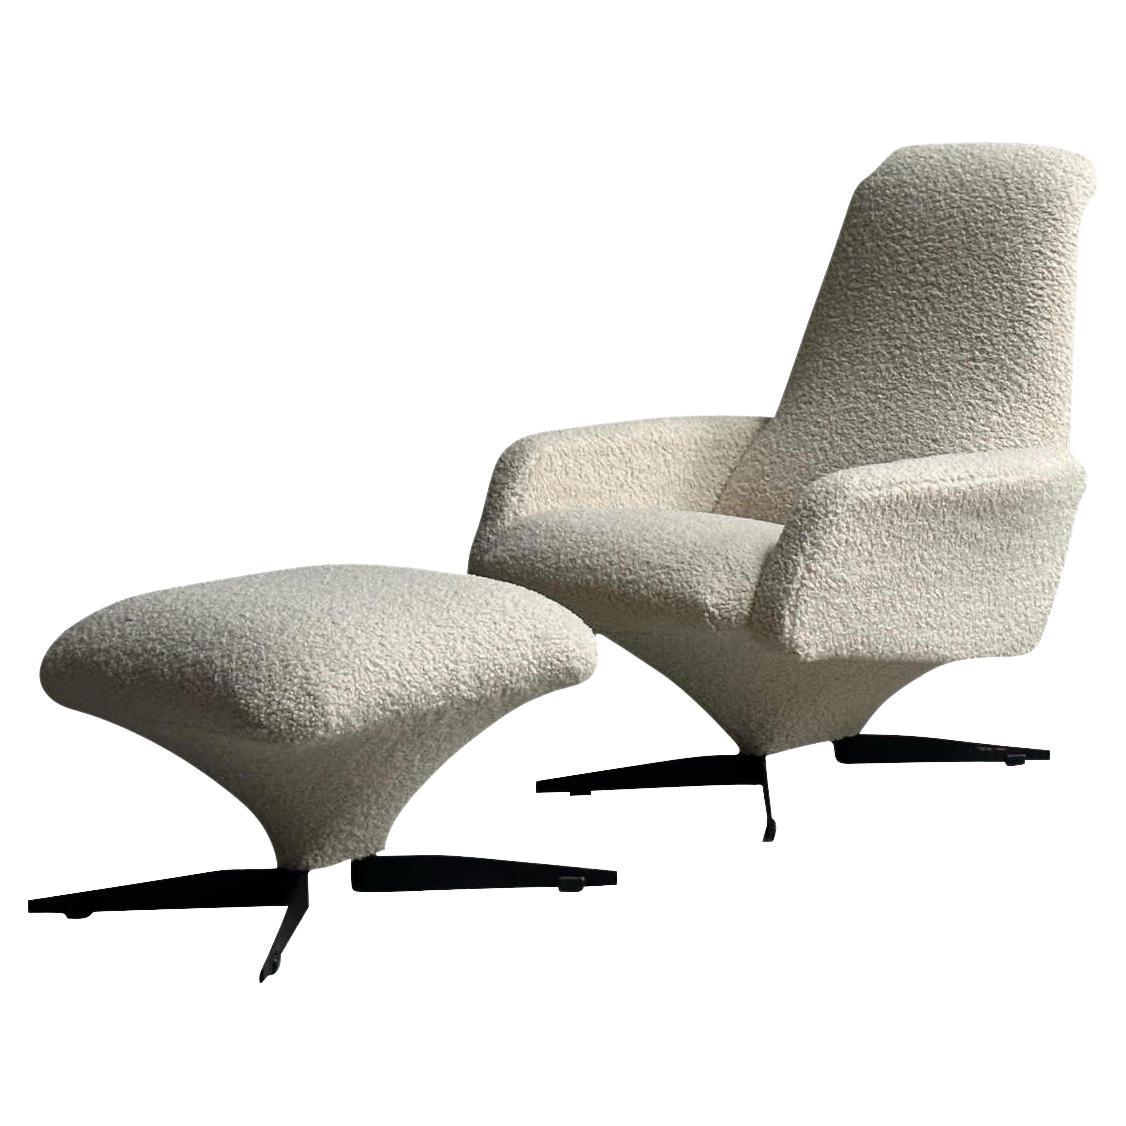 White Bouclé Upholstered Chair with Ottoman, Italy, 1960s For Sale